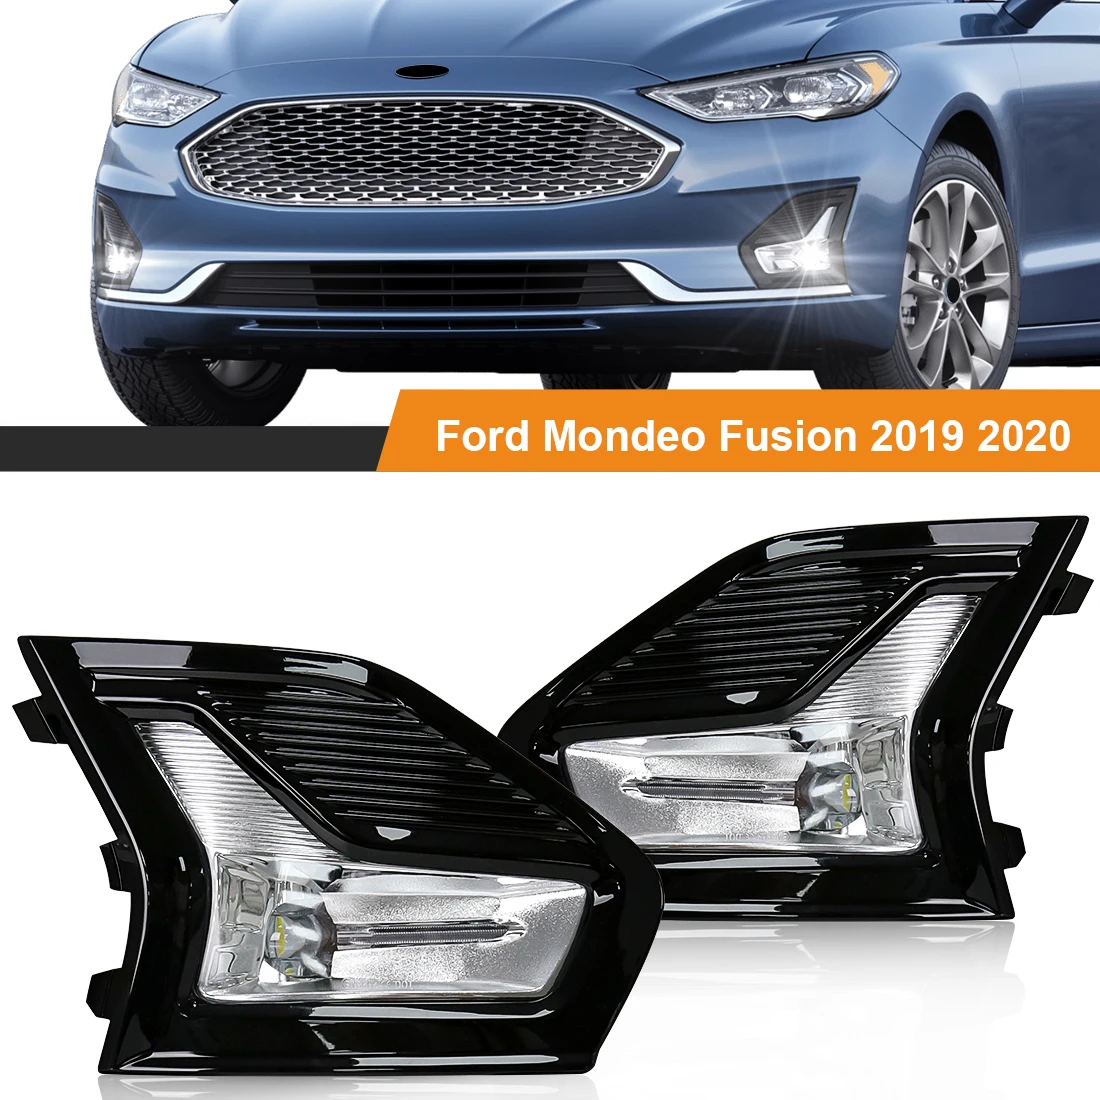 Led Fog Lamps For Ford Mondeo Fusion 2019 2020 Daytime Running Light DRL Car - $65.82+